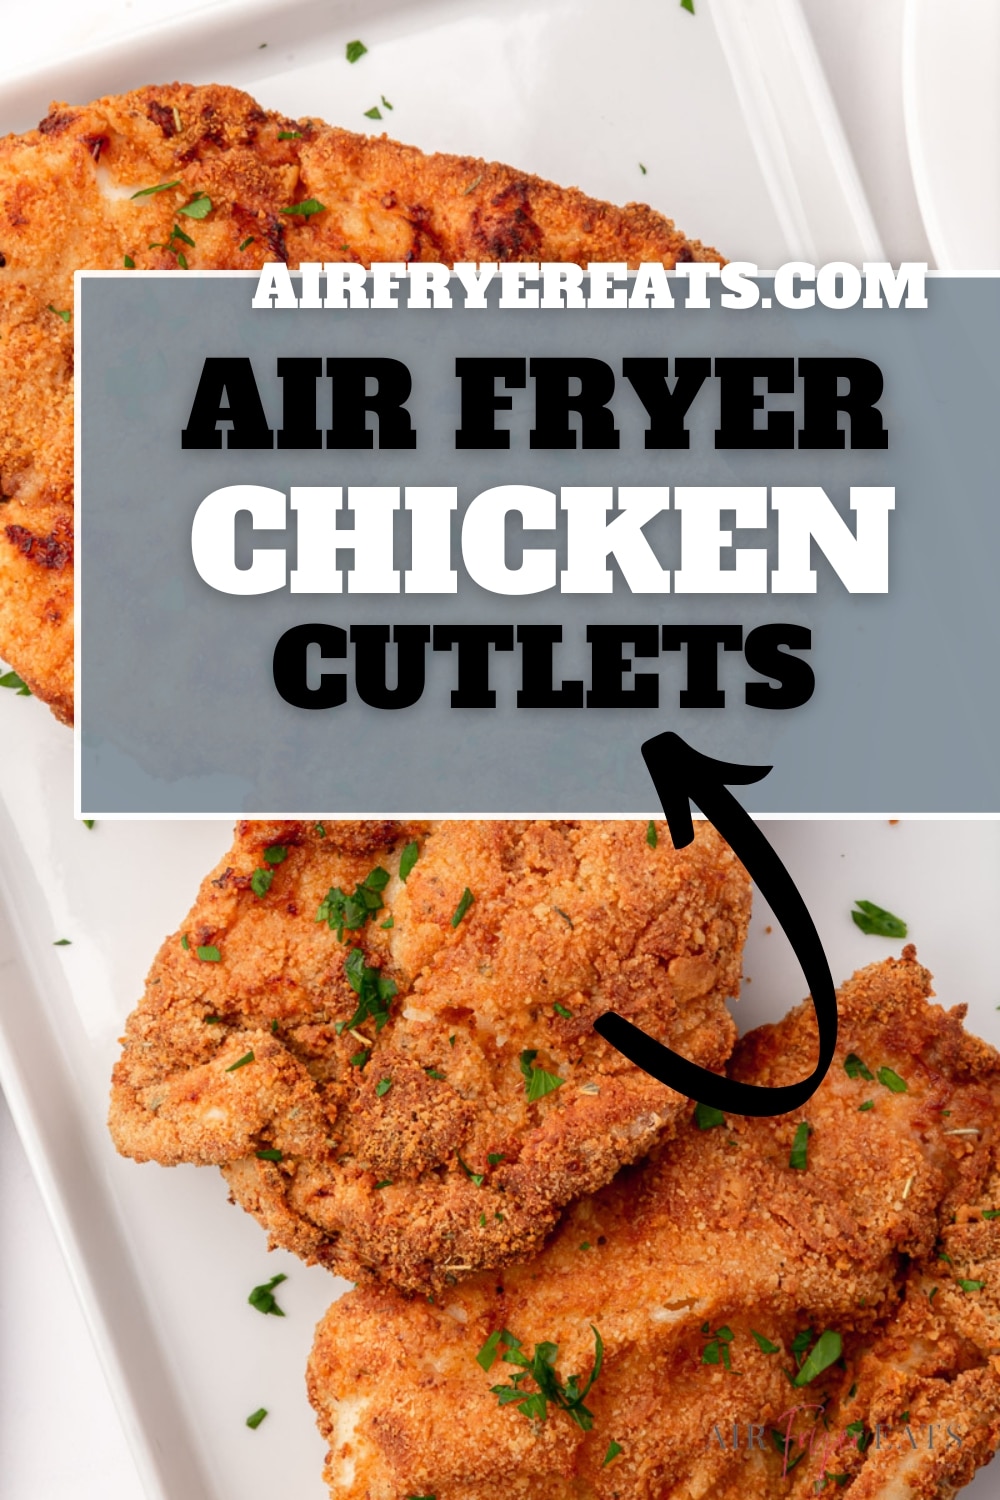 Air Fryer Chicken Cutlets are so easy to make! Coated in a mix of Italian bread crumbs and simple seasonings, these crispy cutlets are cooked in the air fryer with just a small amount of oil, and ready in under 20 minutes. via @vegetarianmamma